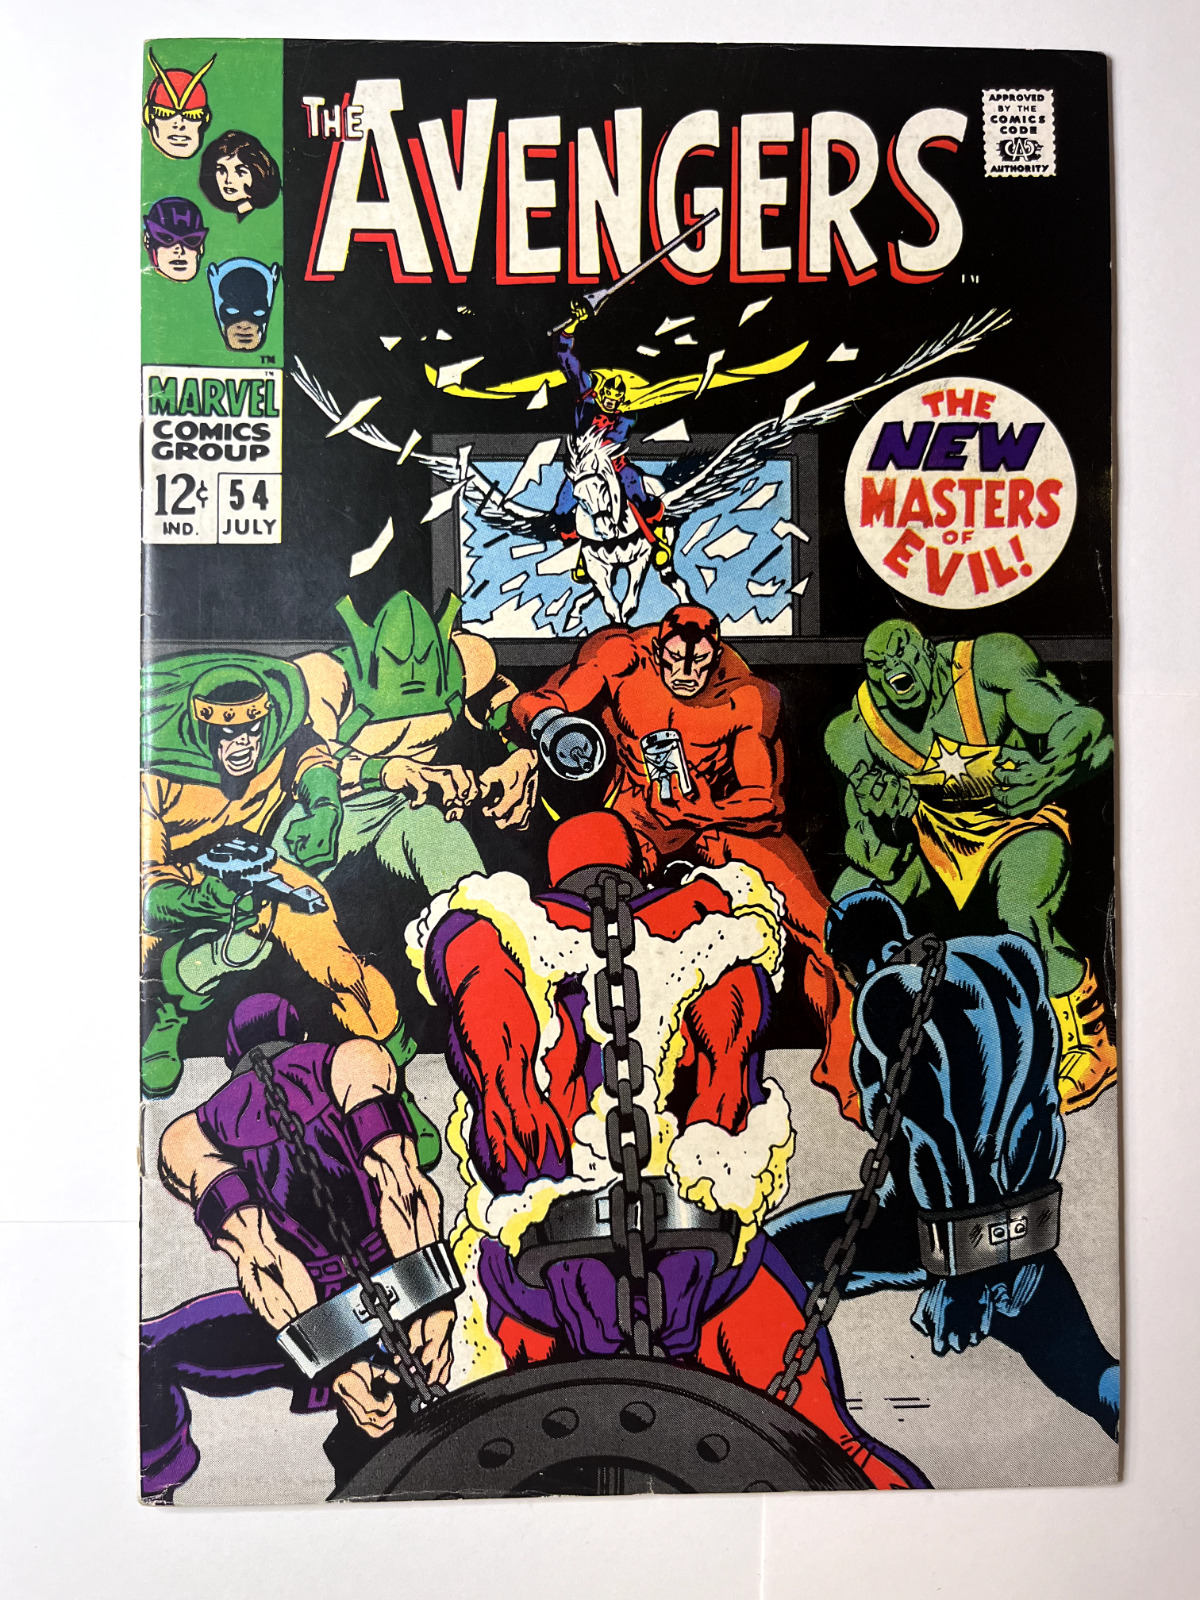 July 1968 The Avengers Marvel Comic #54 Masters of Evil 1st Ultron Black Knight